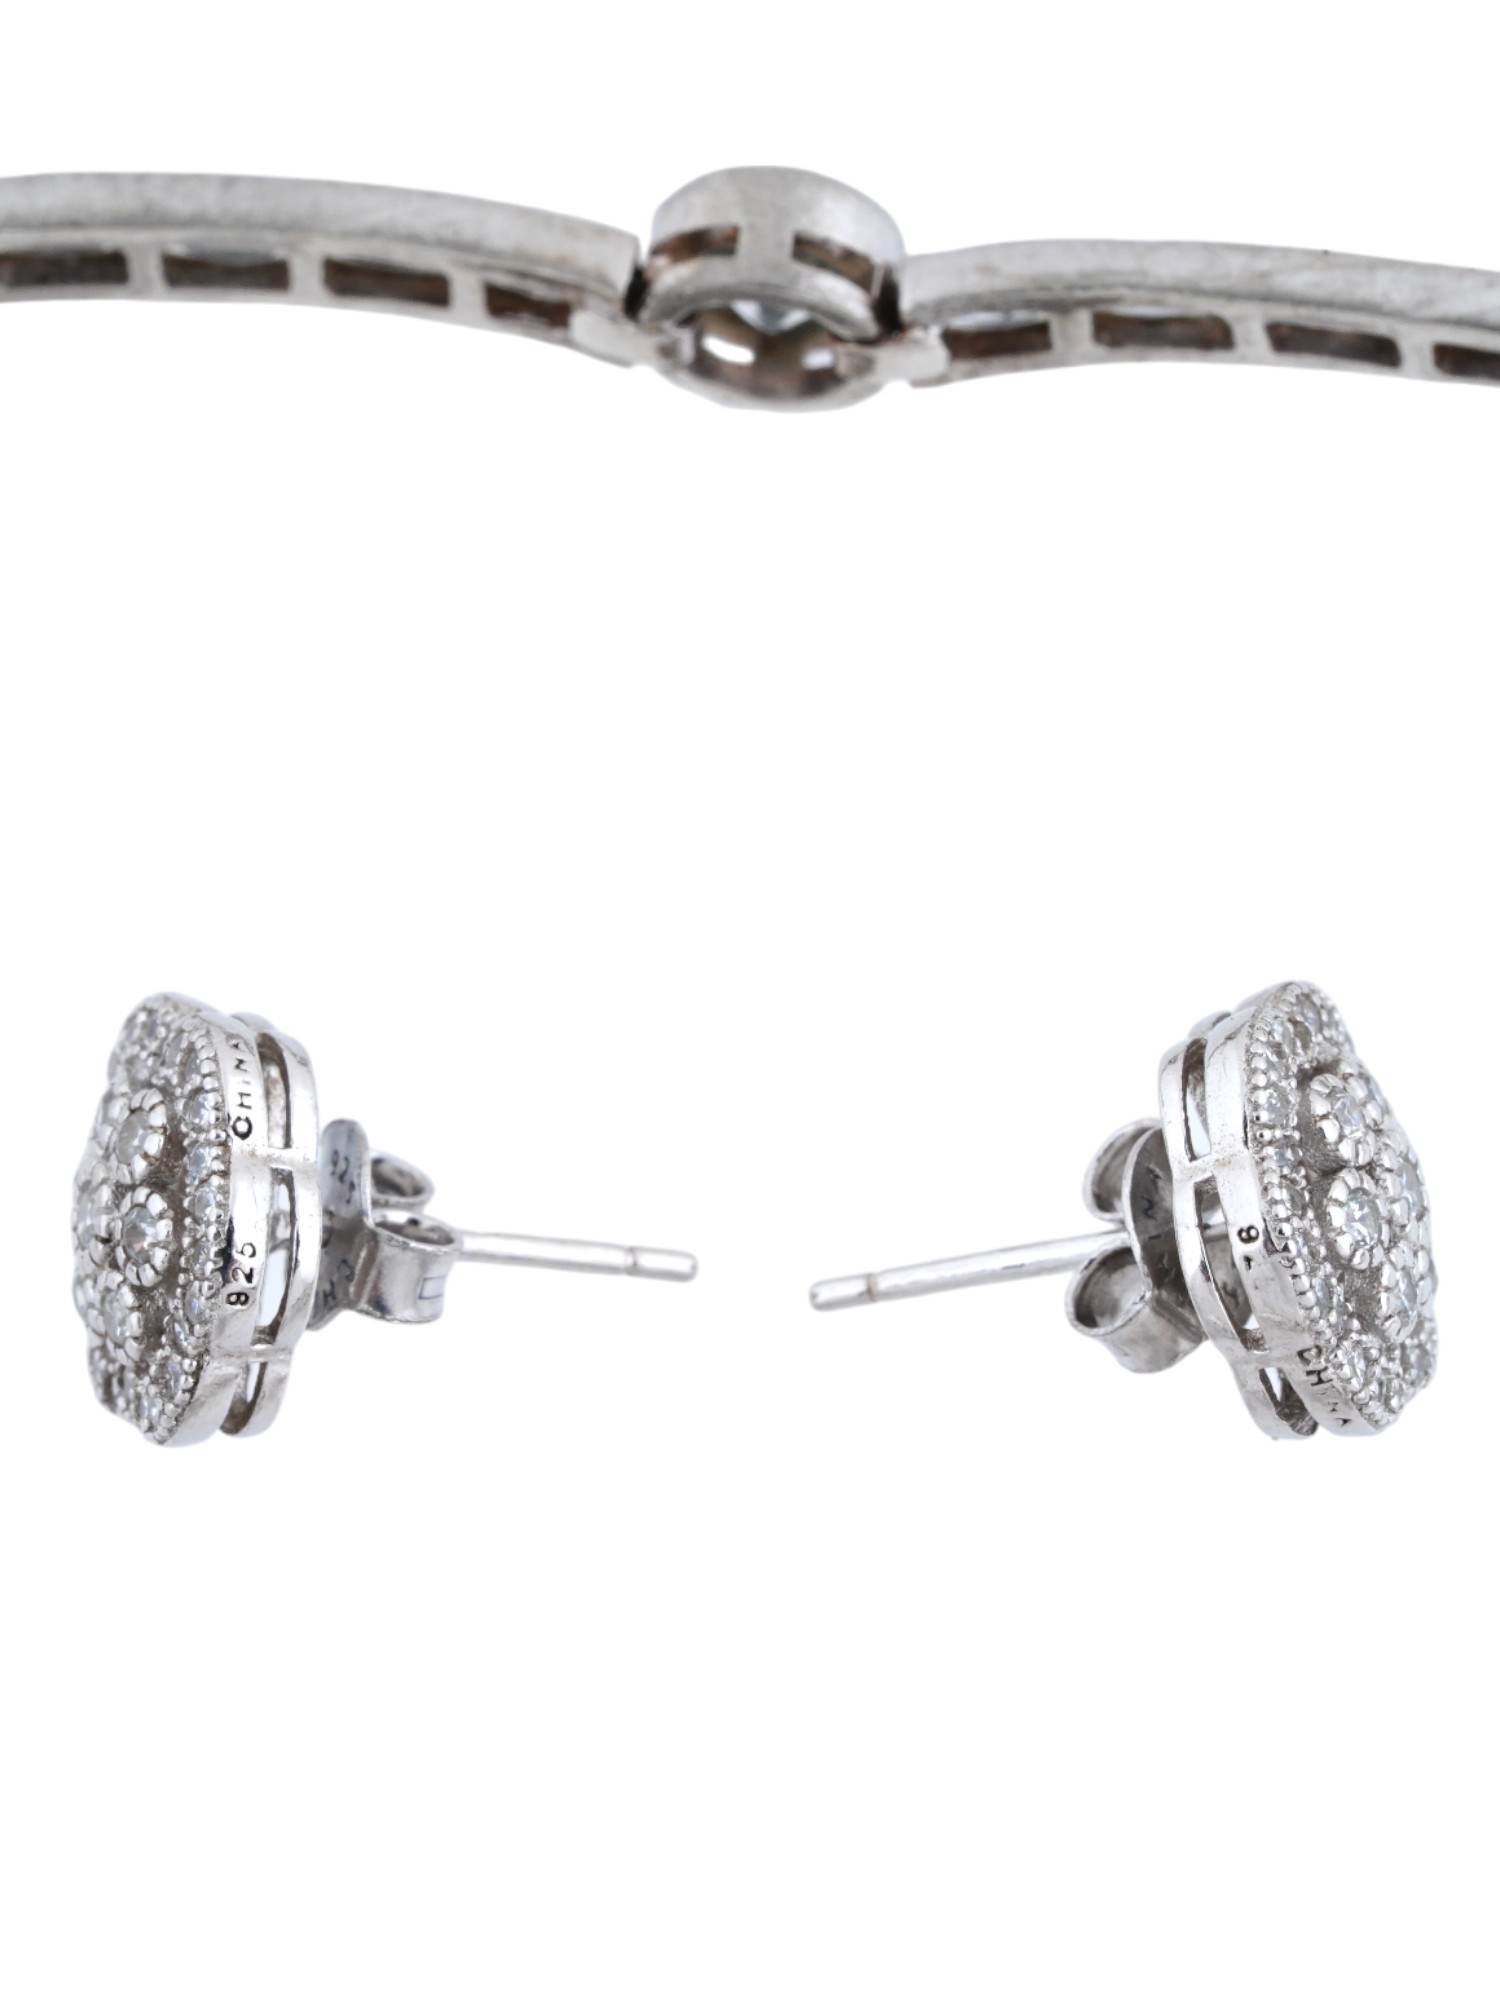 925 STERLING SILVER TENNIS BRACELET WITH EARRINGS PIC-3